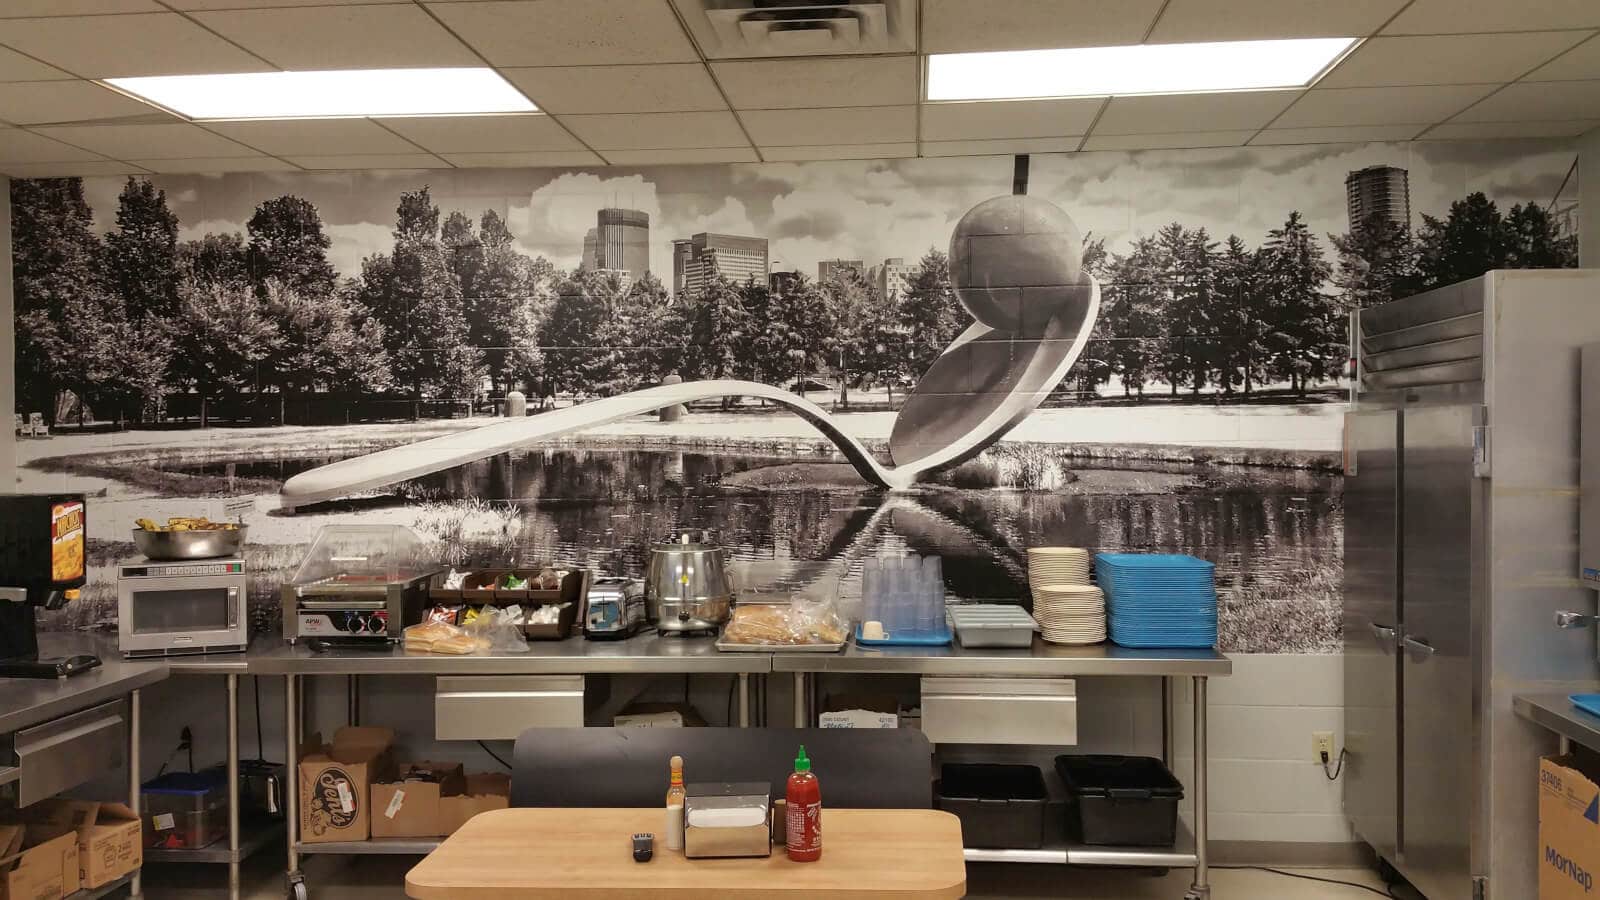 Textured surface wall mural for Loews Minneapolis Hotel. 12-Point SignWorks - Franklin, TN